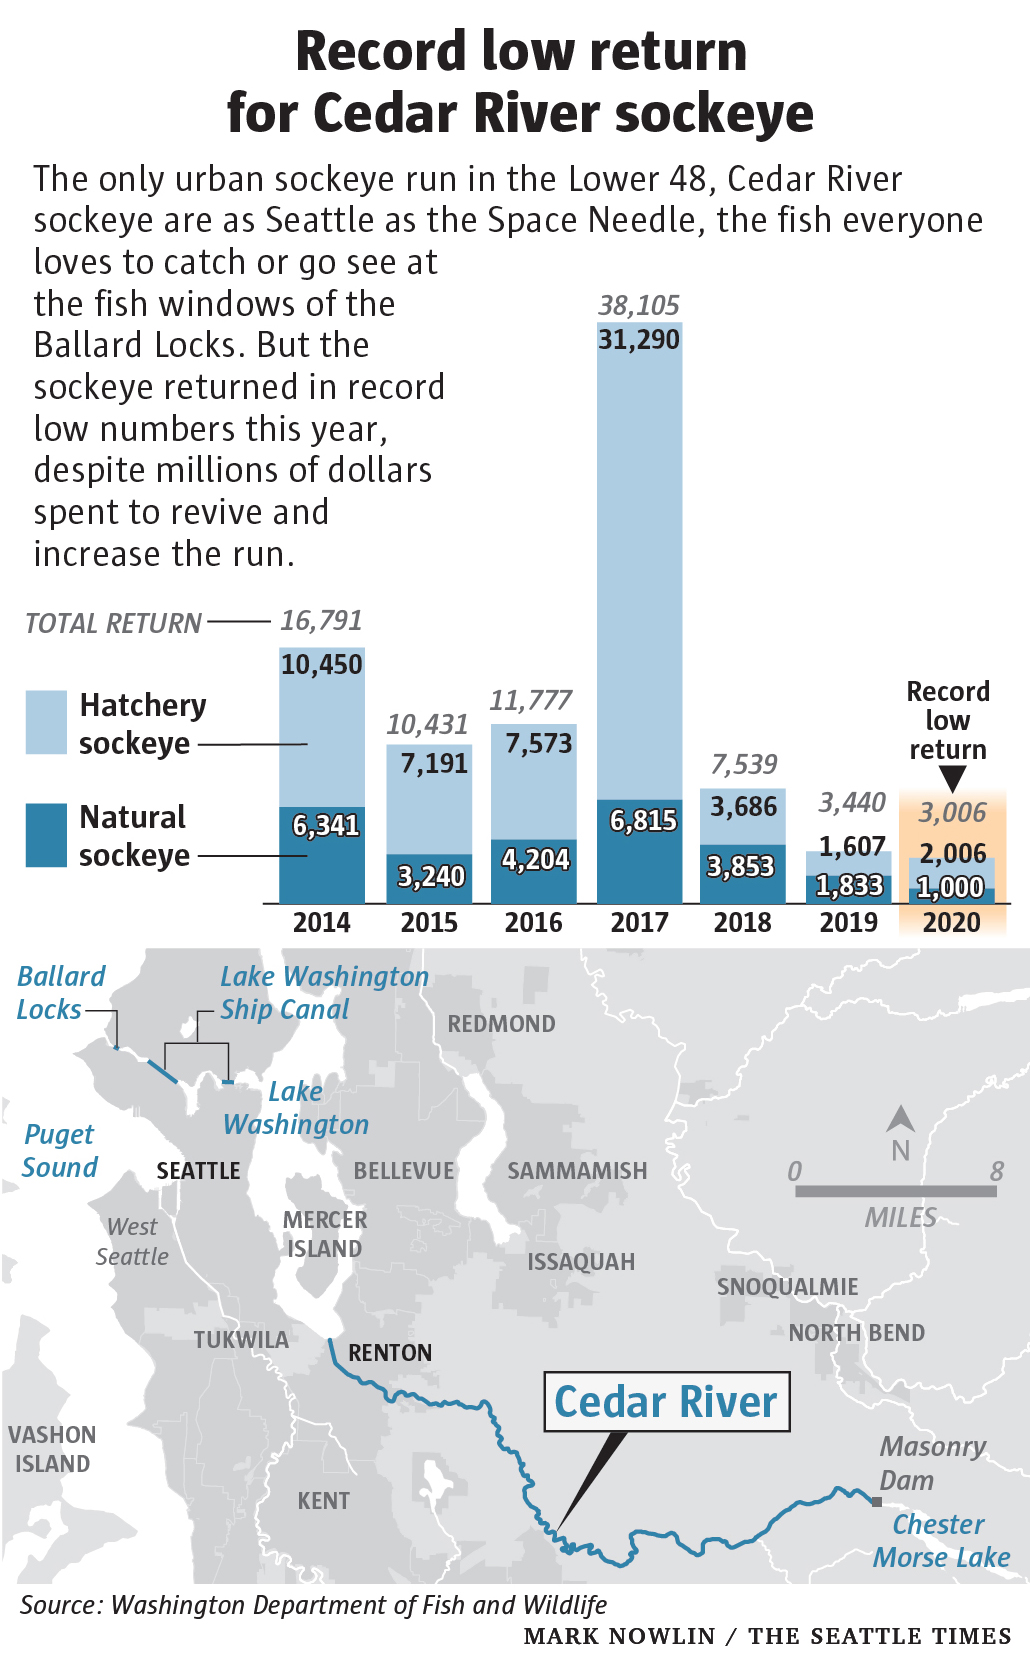 Return rates for Cedar River Sockeye salmon, 2014-2020. In 2020, the number of returning salmon declined to a record low. Data: Washington Department of Fish and Wildlife. Graphic: Mark Nowlin / The Seattle Times